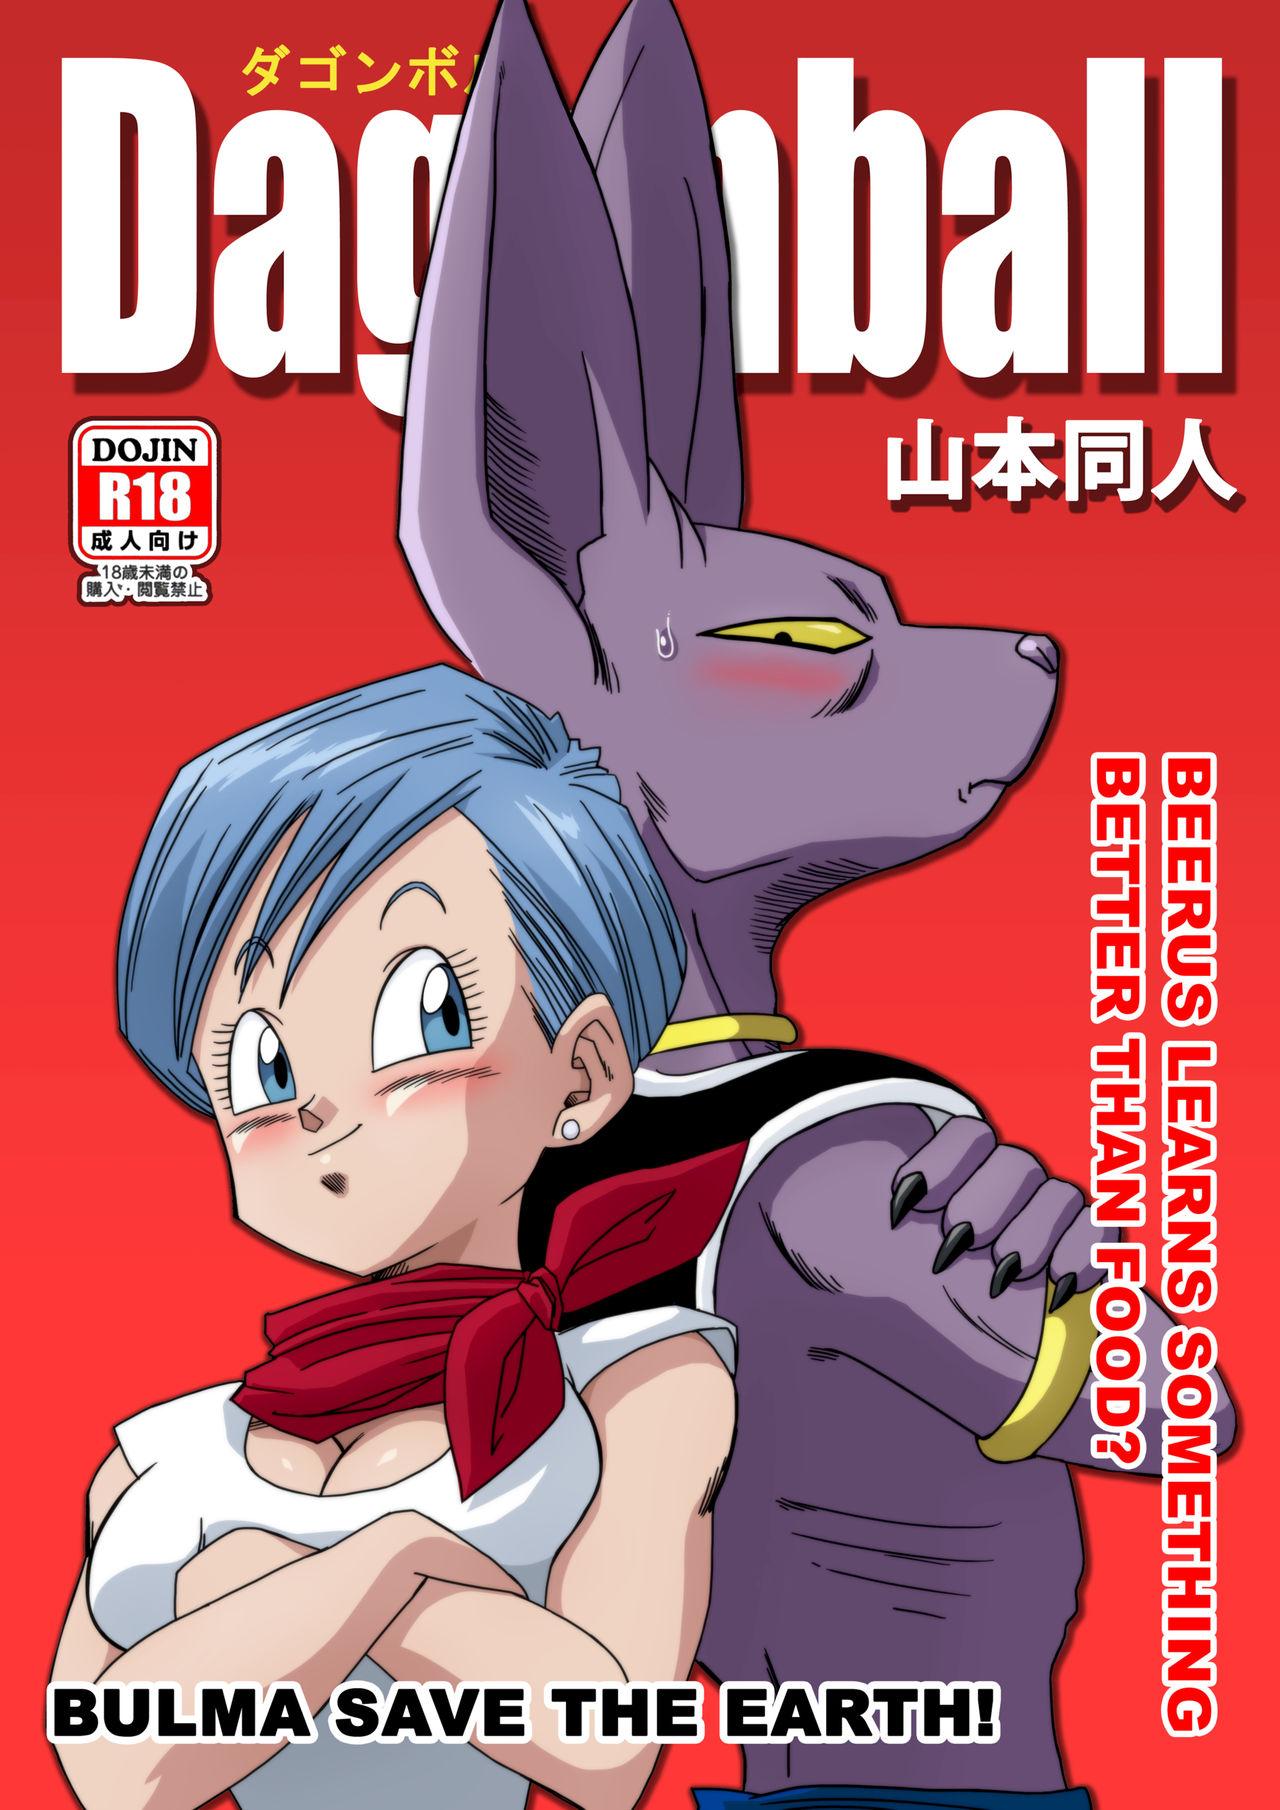 Playing Bulma Saves The Earth! - Dragon ball Asia - Picture 1